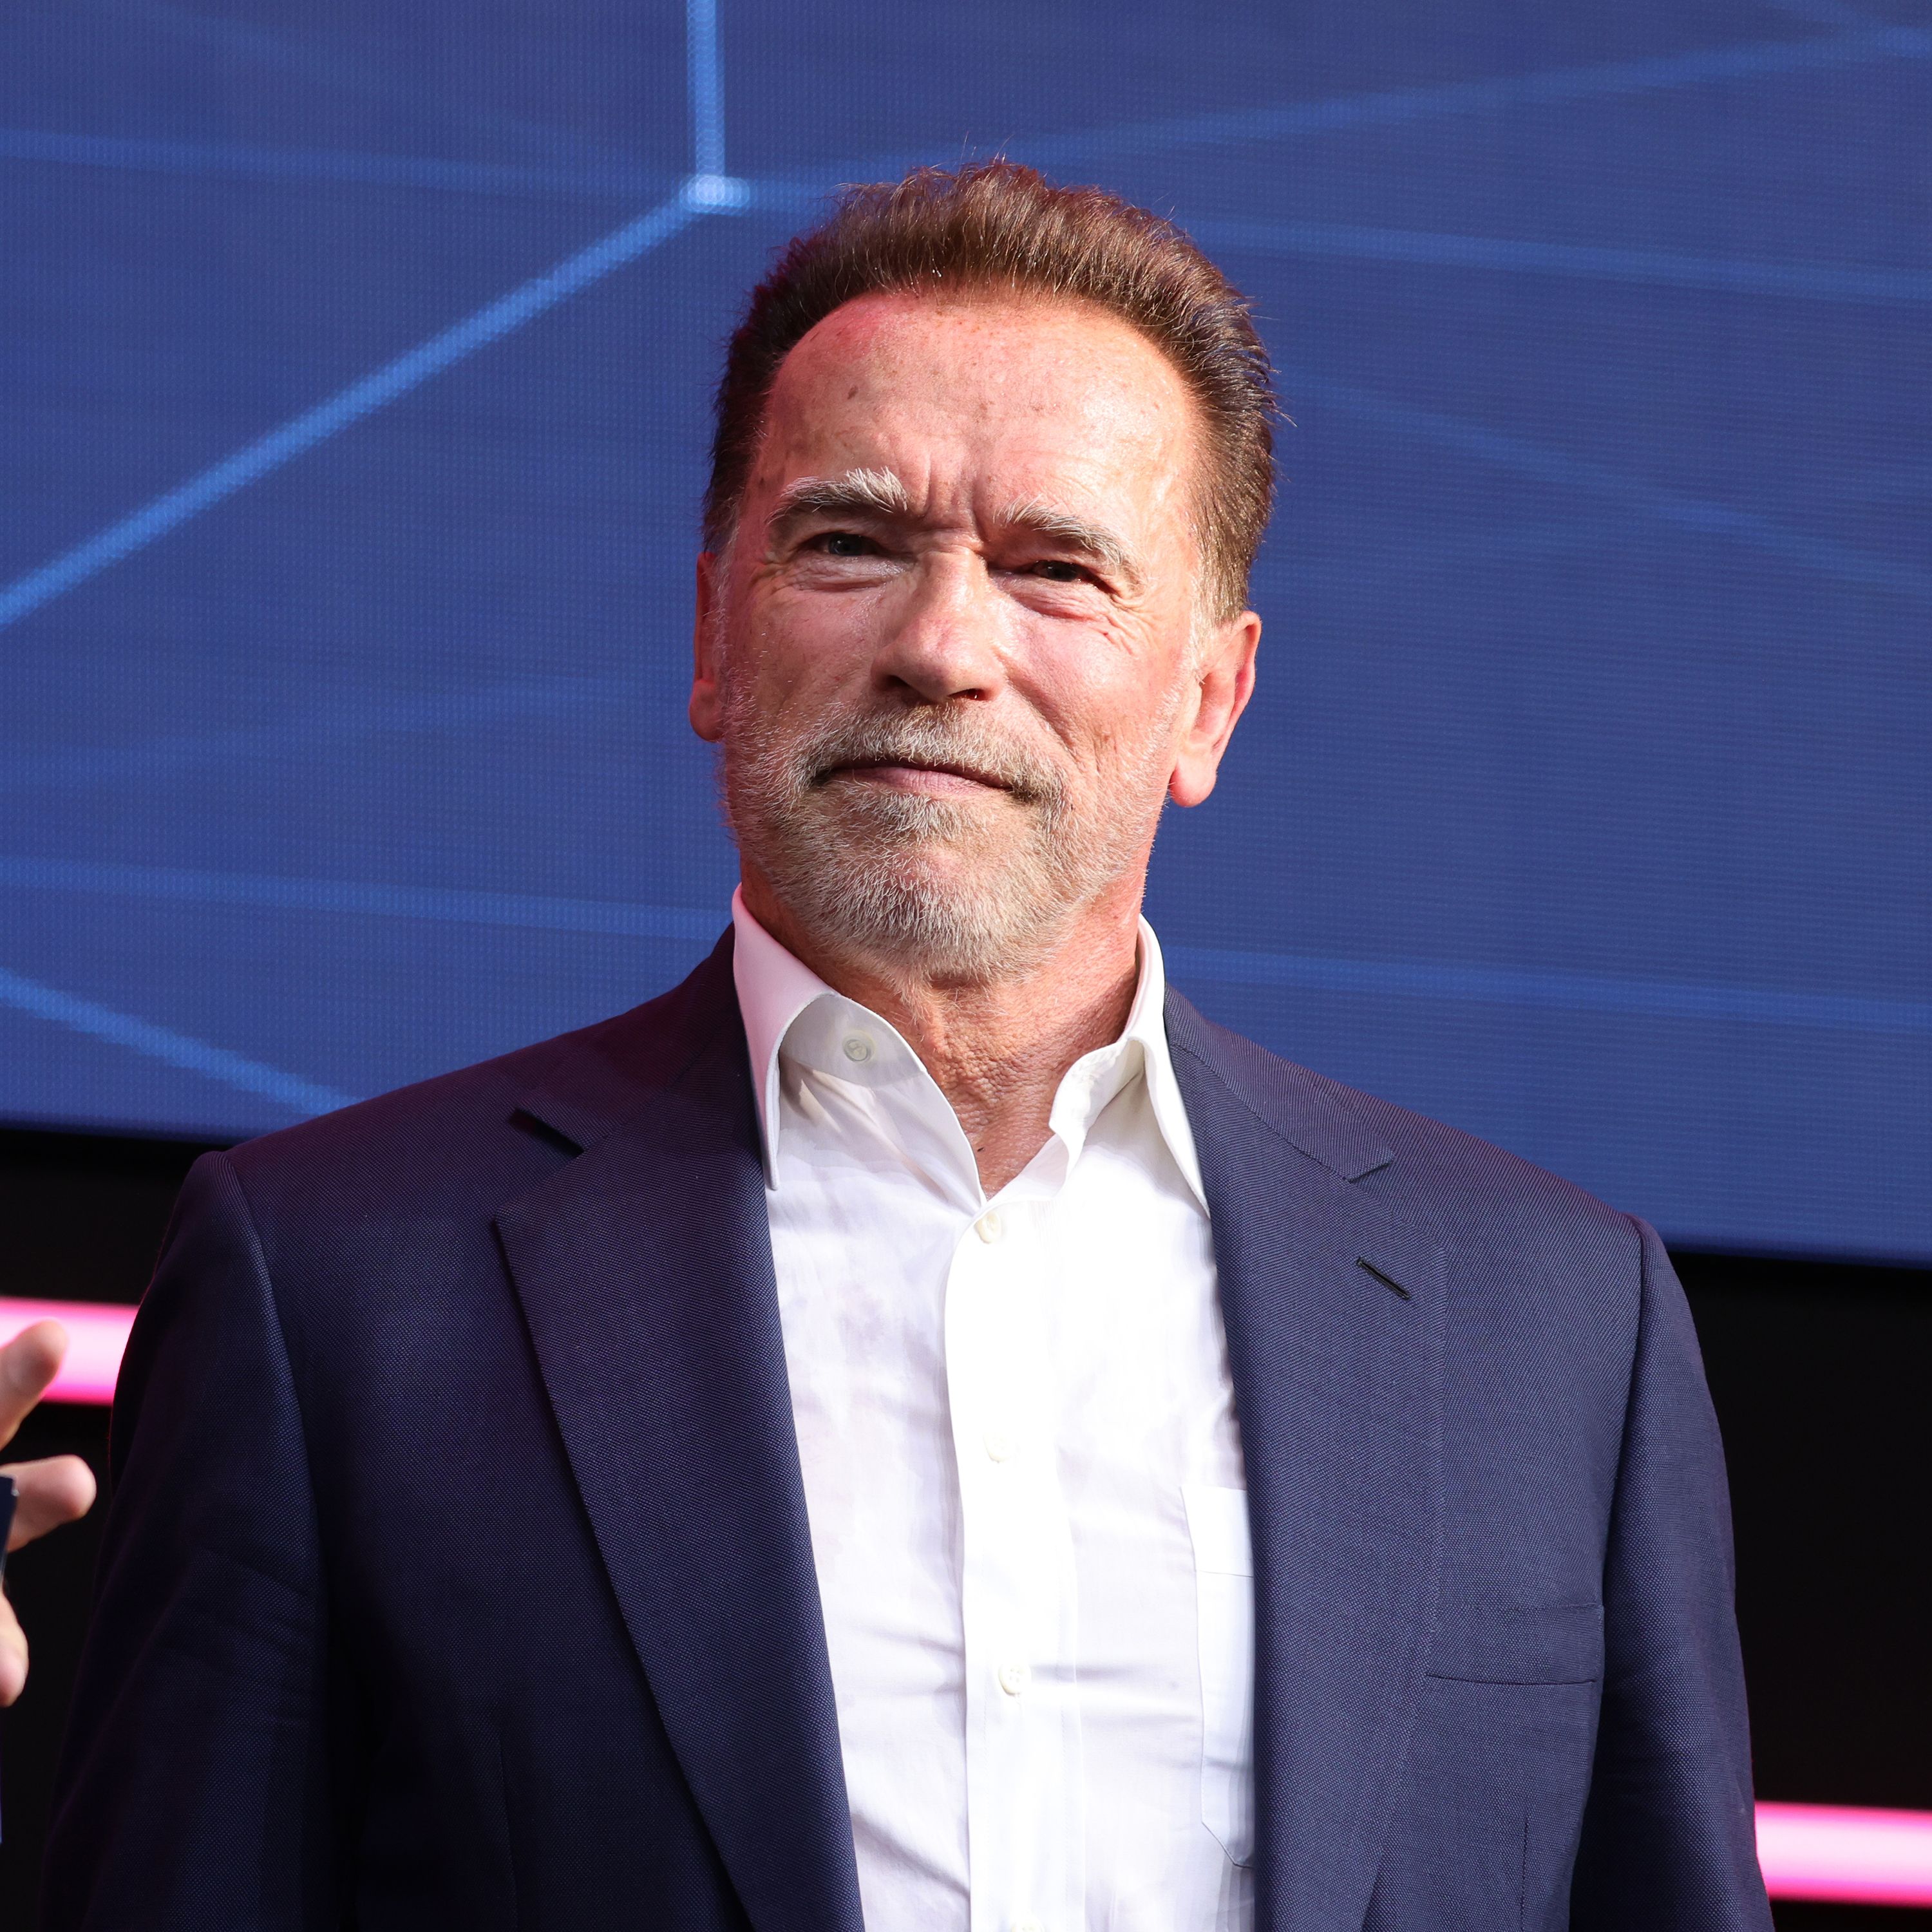 latest pictures of arnold schwarzenegger